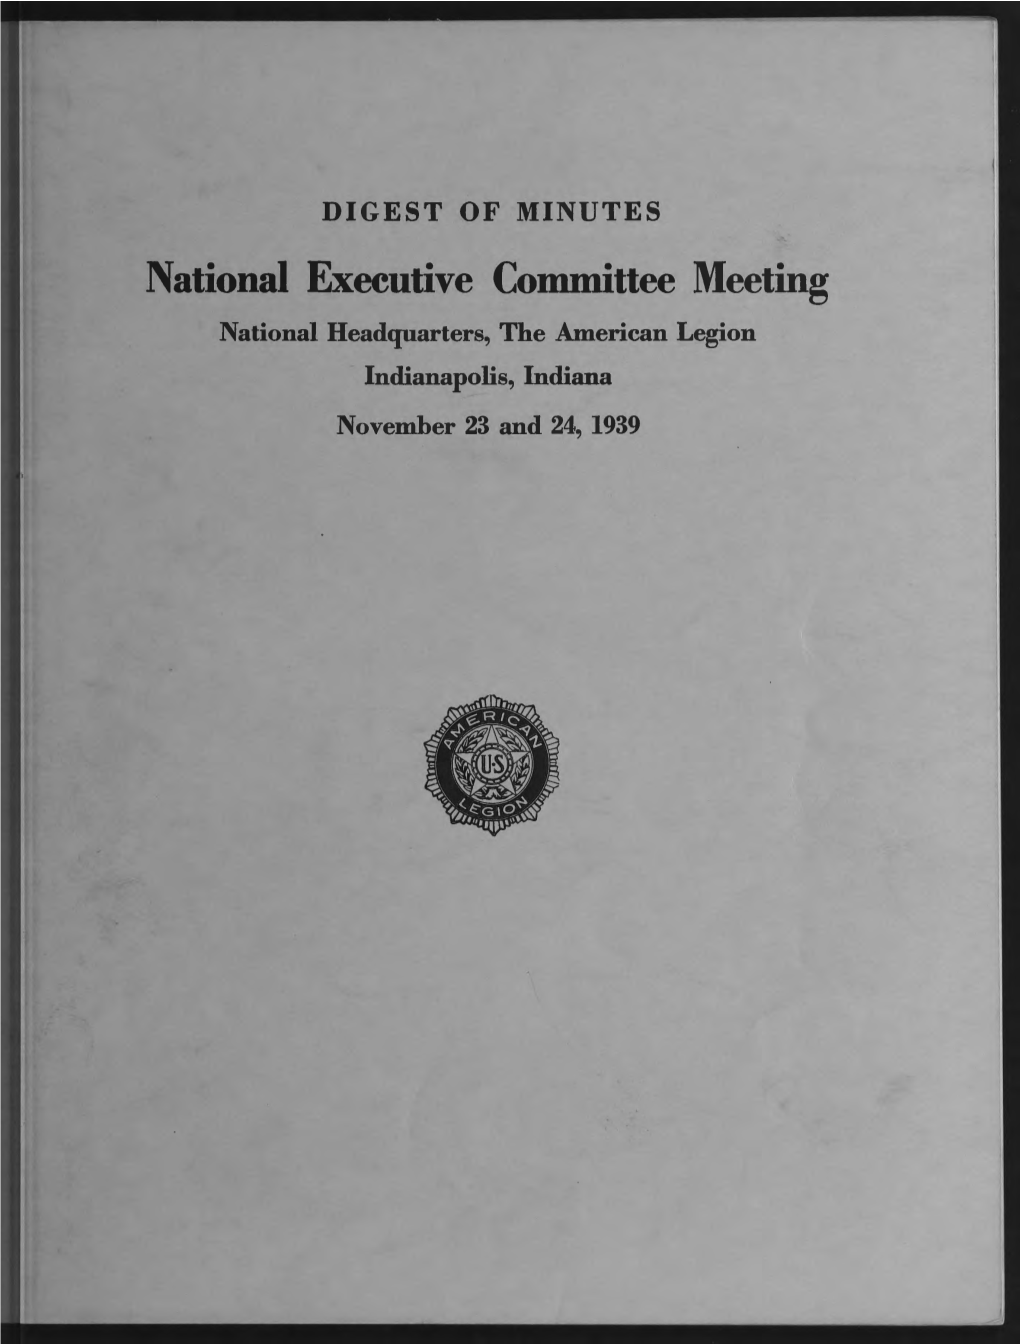 National Executive Committee Meeting National Headquarters, the American Legion Indianapolis, Indiana November 23 and 24, 1939